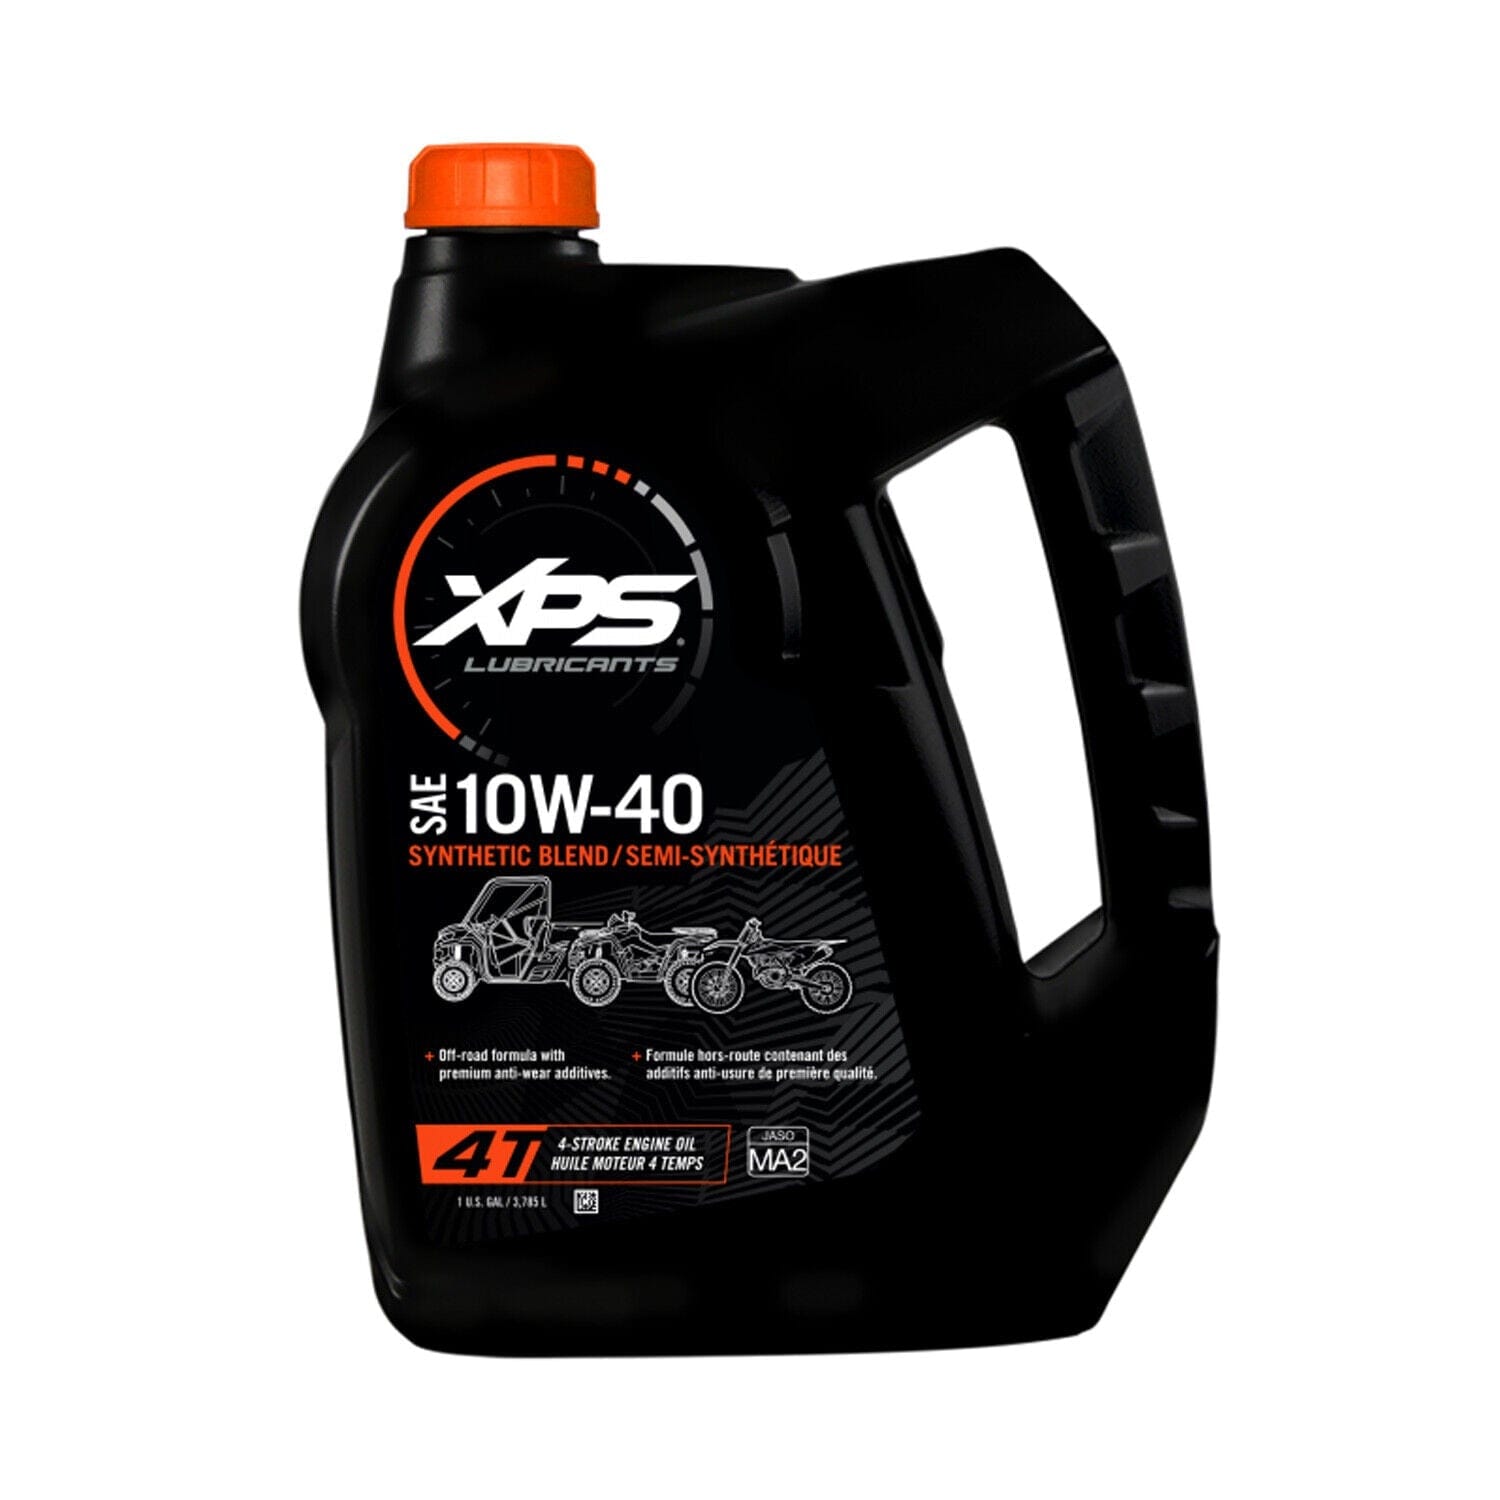 4T 10W-40 Synthetic Blend Oil